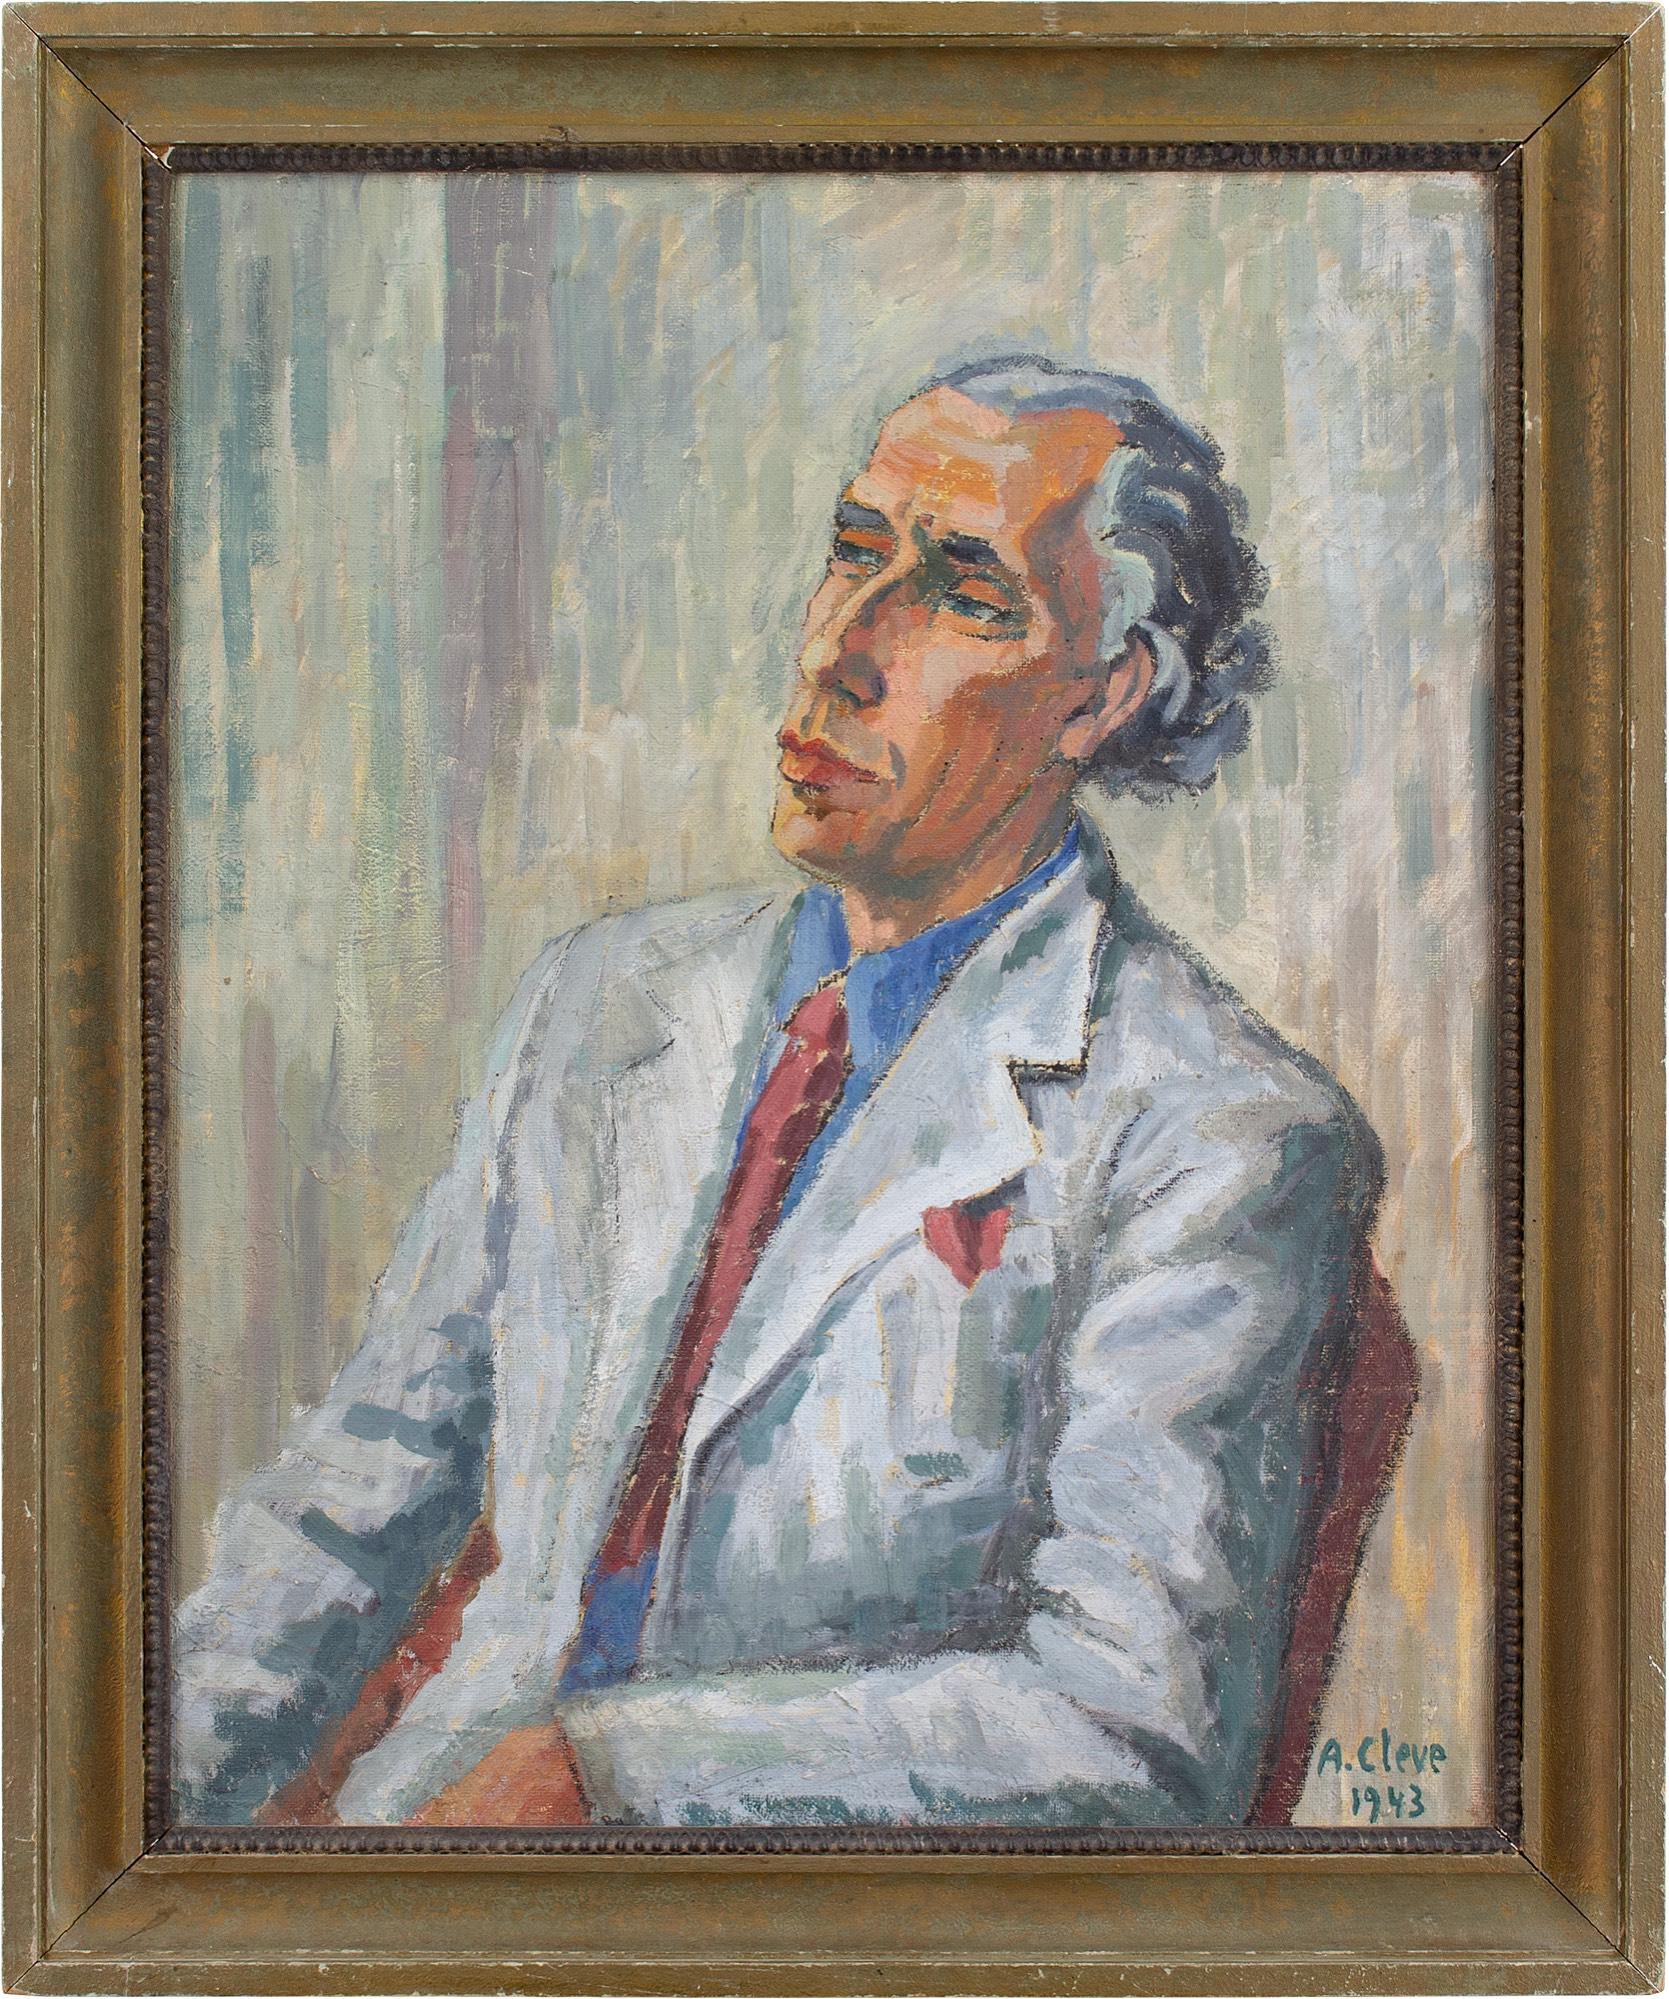 This majestic portrait by Swedish artist Agnes Cleve (1876-1951) depicts Jan Bolinder wearing a blue shirt, grey jacket and red tie. He’s chiselled and exudes confidence.

Cleve was a fascinating artist and one of Sweden’s first modernists. Together